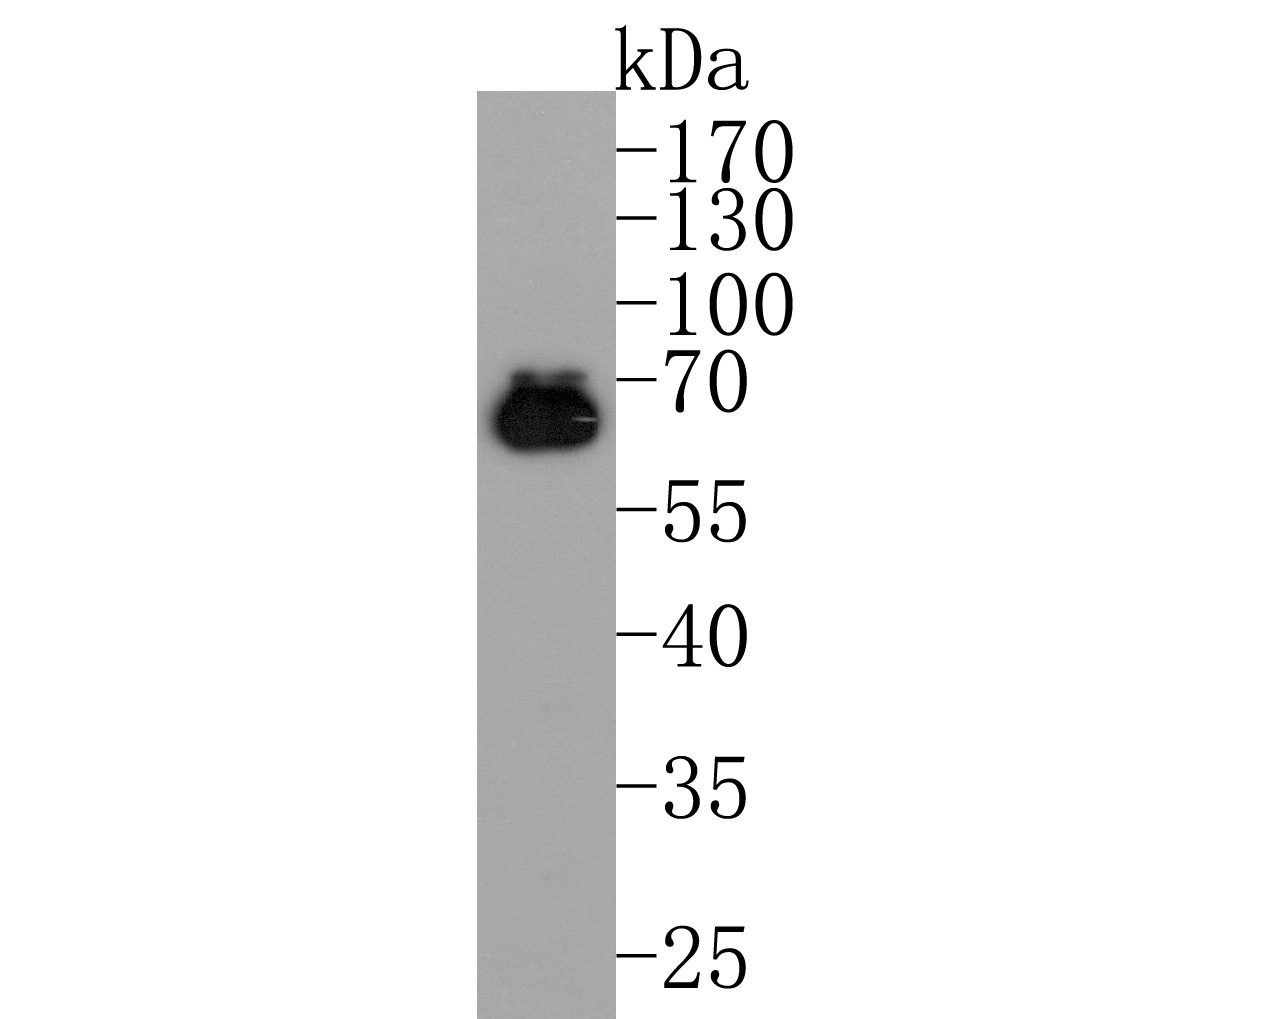 Western blot analysis of AMPK alpha 2 on PC-12 cell lysates. Proteins were transferred to a PVDF membrane and blocked with 5% BSA in PBS for 1 hour at room temperature. The primary antibody (HA600080, 1/500) was used in 5% BSA at room temperature for 2 hours. Goat Anti-Mouse IgG - HRP Secondary Antibody (HA1006) at 1:20,000 dilution was used for 1 hour at room temperature.